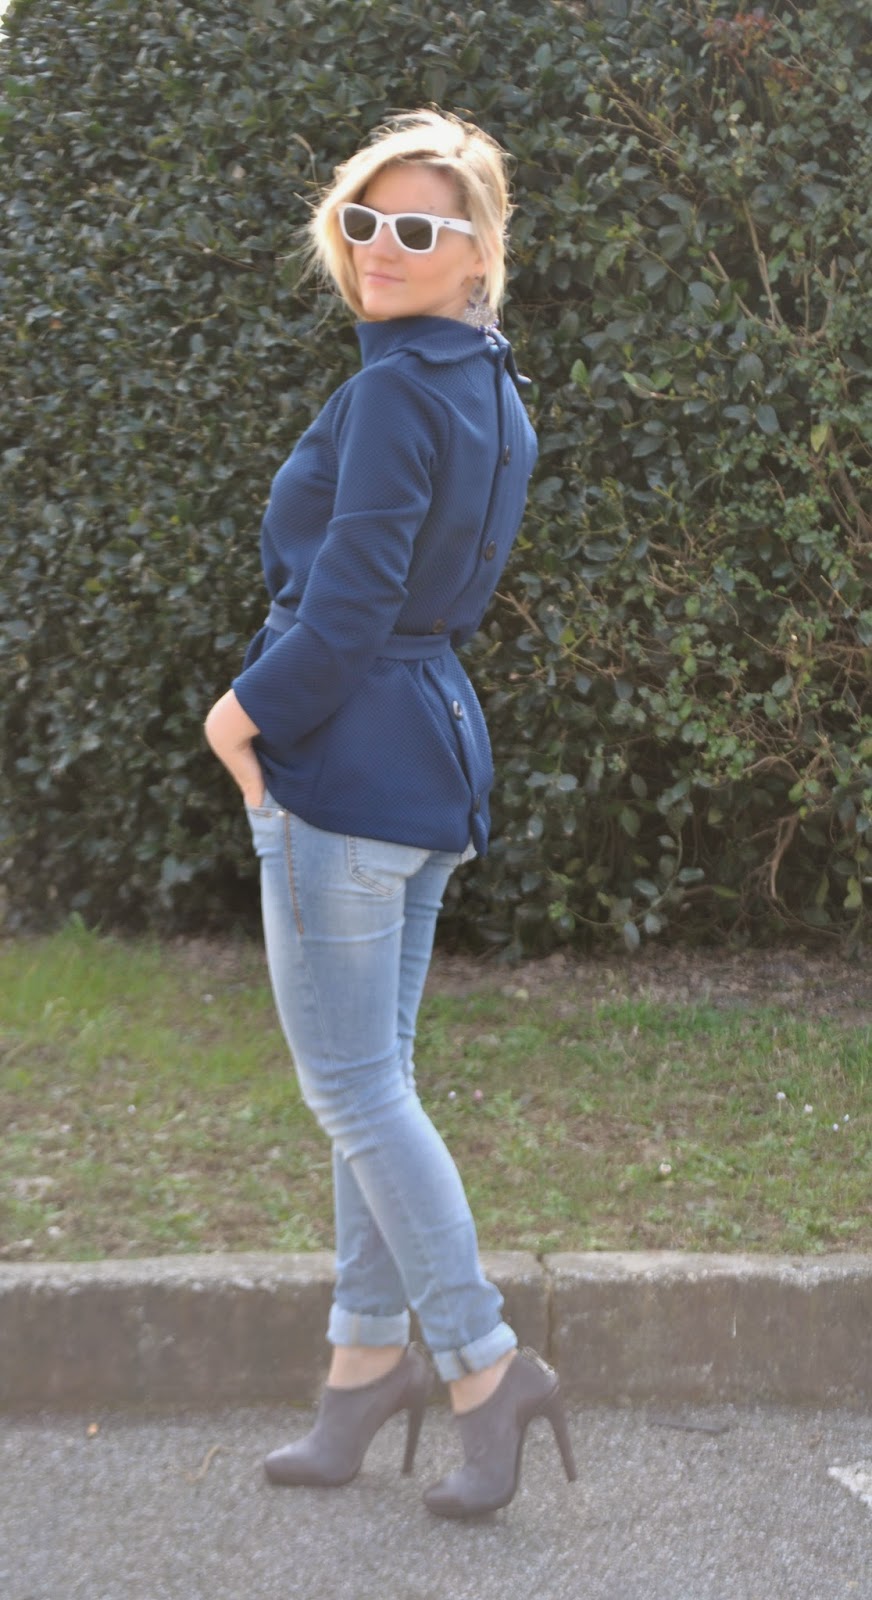 outfit giacca anni '60 outfit blu outfit jeans e tacchi outfit jeans skinny fornarina mariafelicia magno colorblock by felym fashion blog italiani mariafelicia magno fashion blogger come abbinare il blu maglia anni sessanta maglia collo alto maglia a ciambella outfit invernali casual outfit marzo 2015 outfit invernali donna casual outfit burda maglia anni '60 burda come abbinare il grigio fashion blogger italiane come abbinare gli occhiali da sole bianchi come abbinare il grigio outfit scarpe grigie orologio daniel wellington winter outfit blue outfit how to wear jeans and heels  ffashion bloggers italy blonde girl blonde hair 